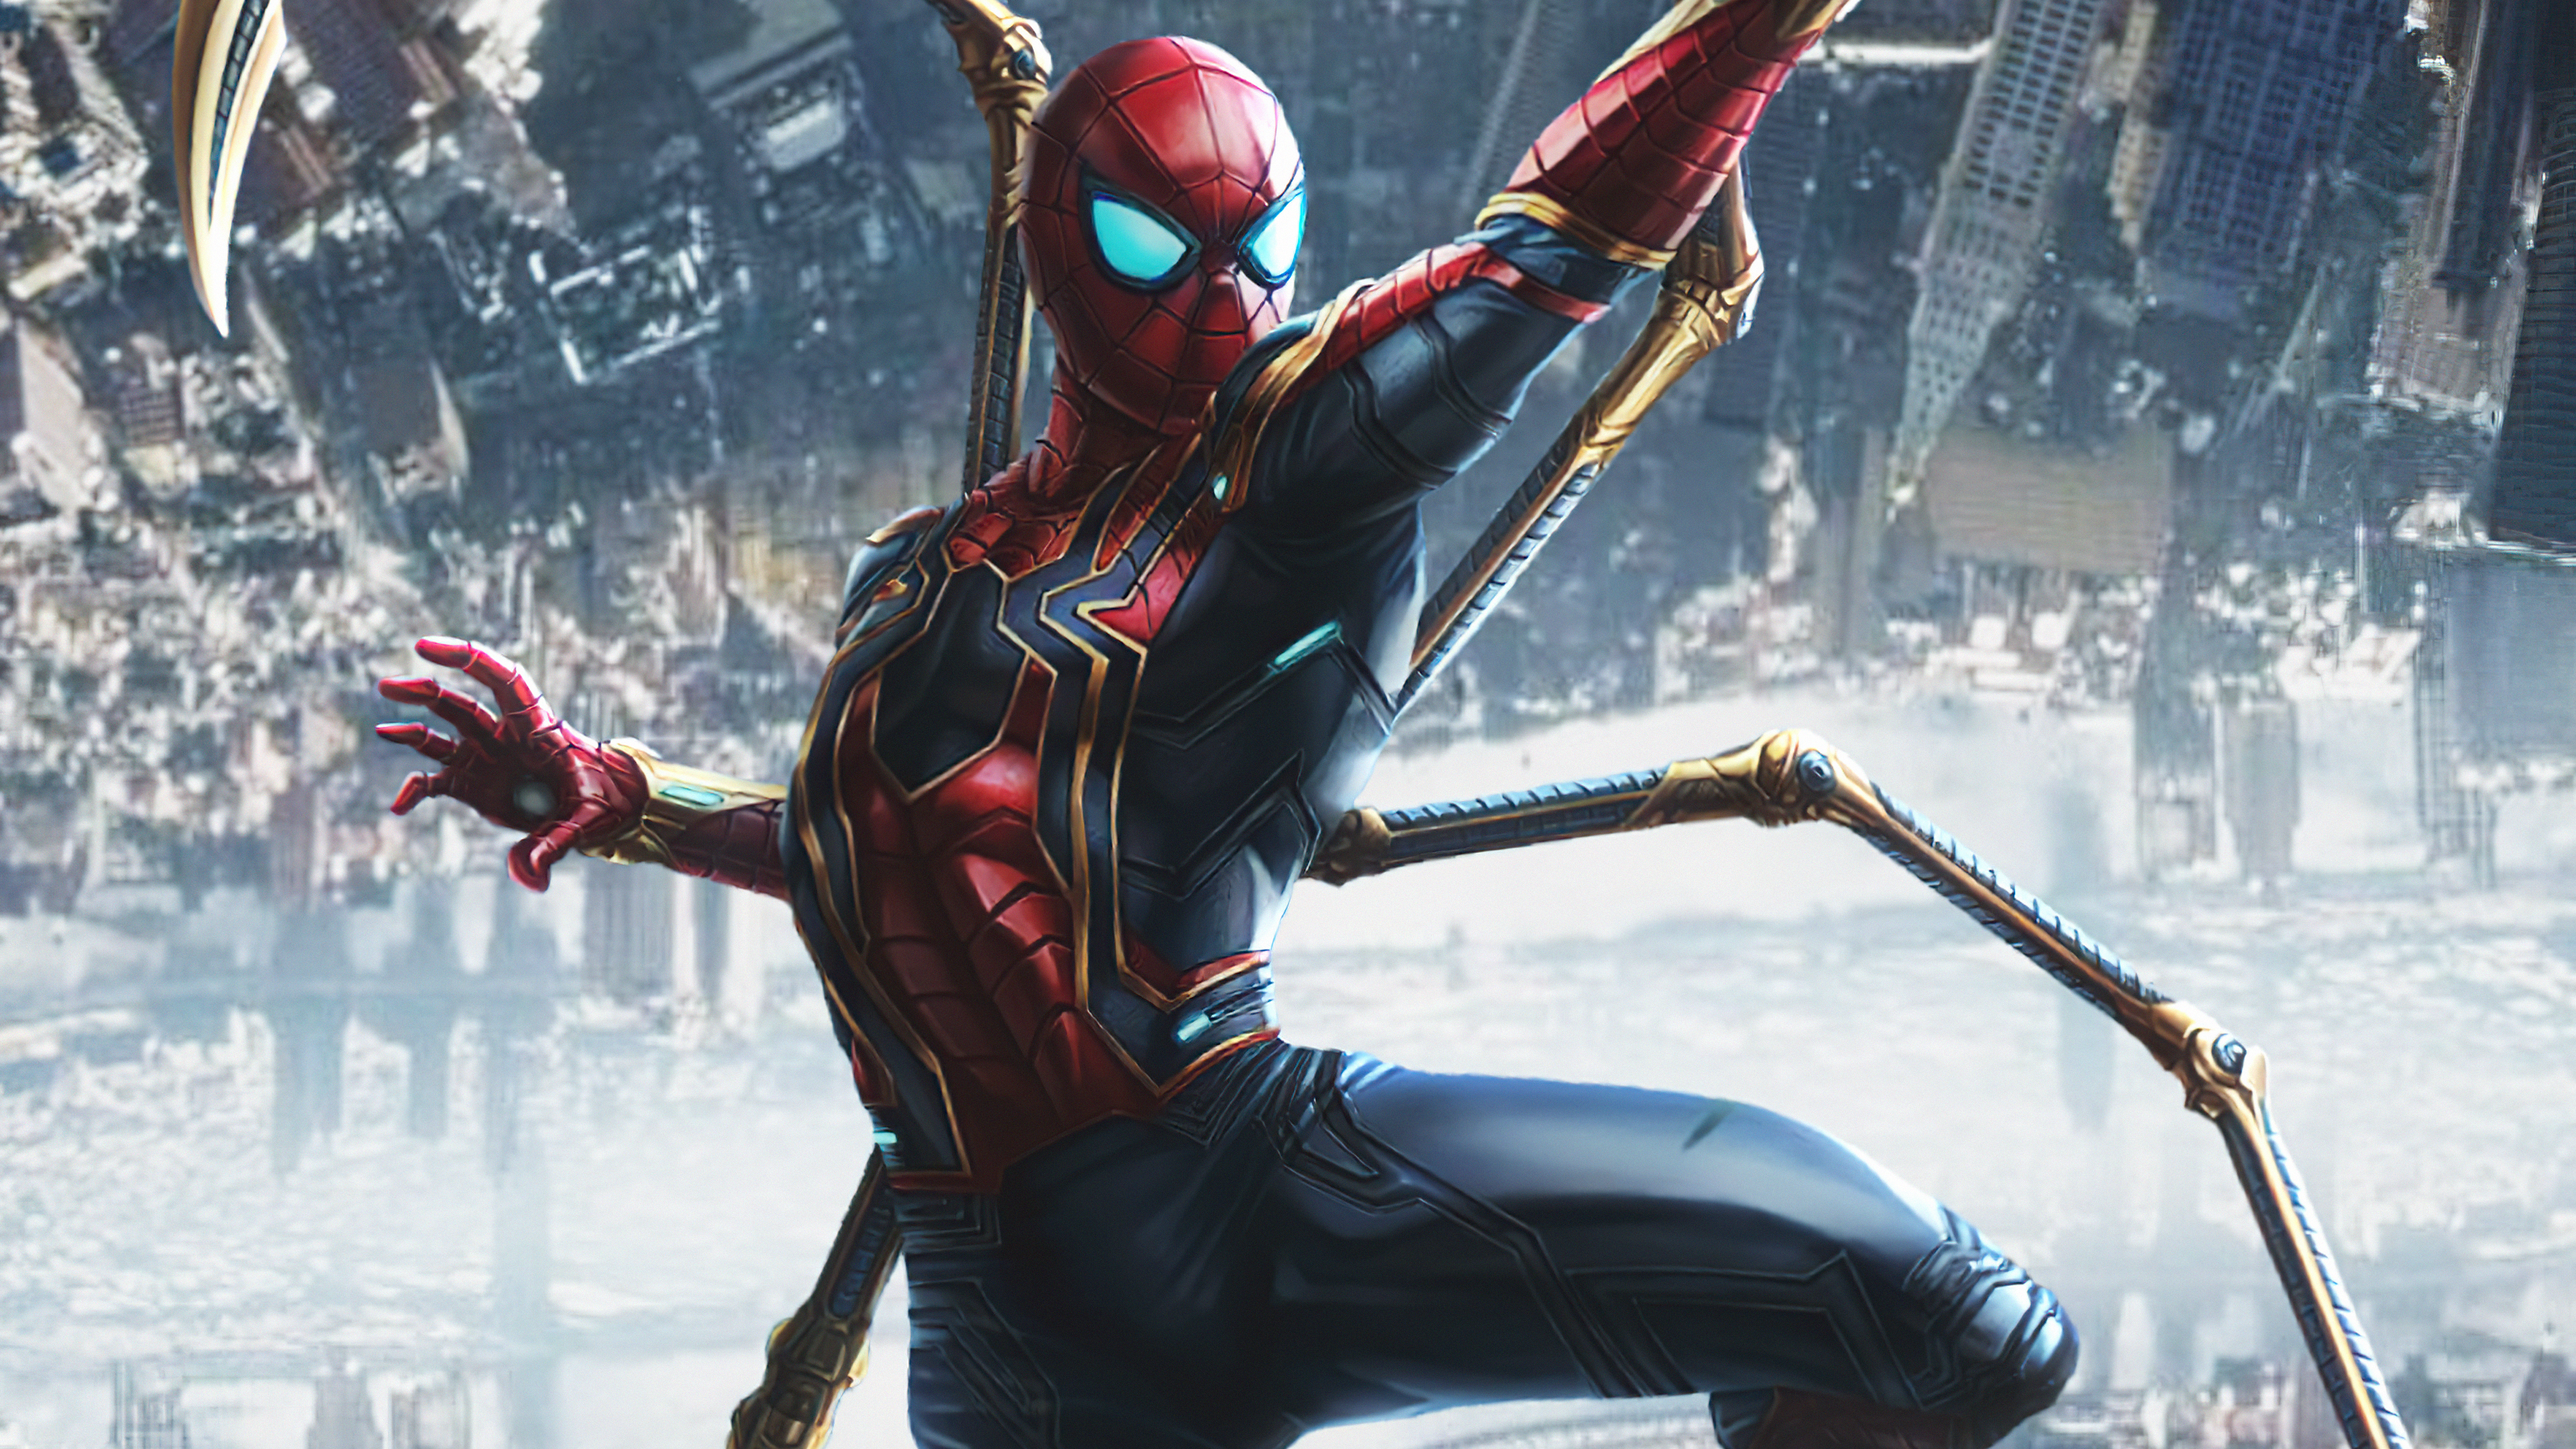 Iron spider in spiderman no way home hd superheroes k wallpapers images backgrounds photos and pictures